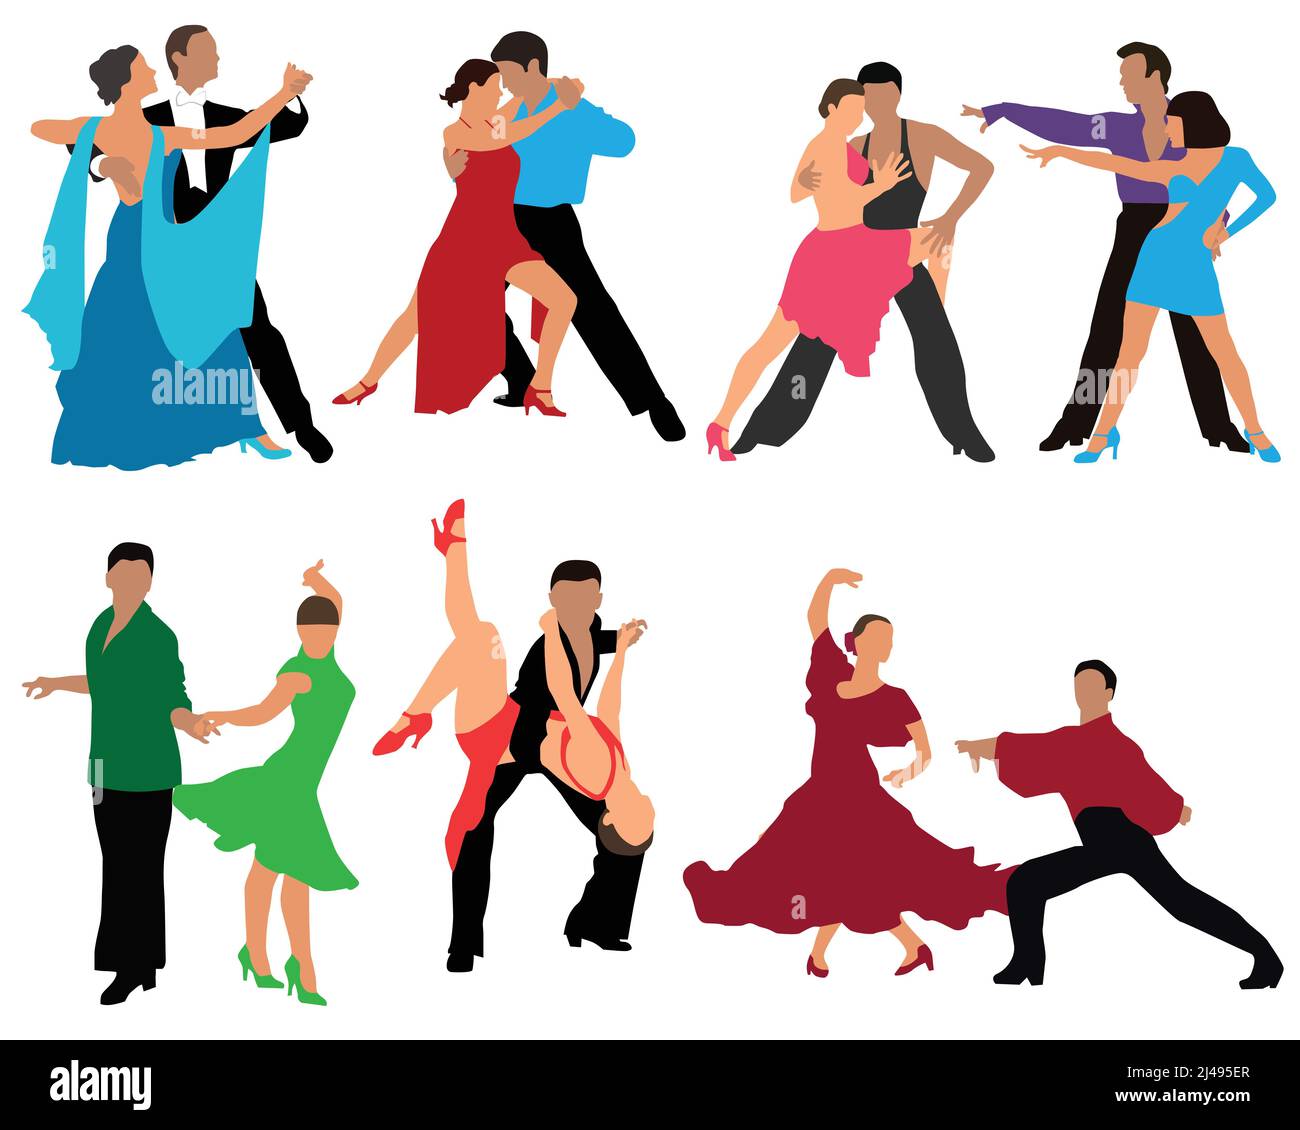 Dancing couples, different styles of dance, color vector illustration Stock Vector